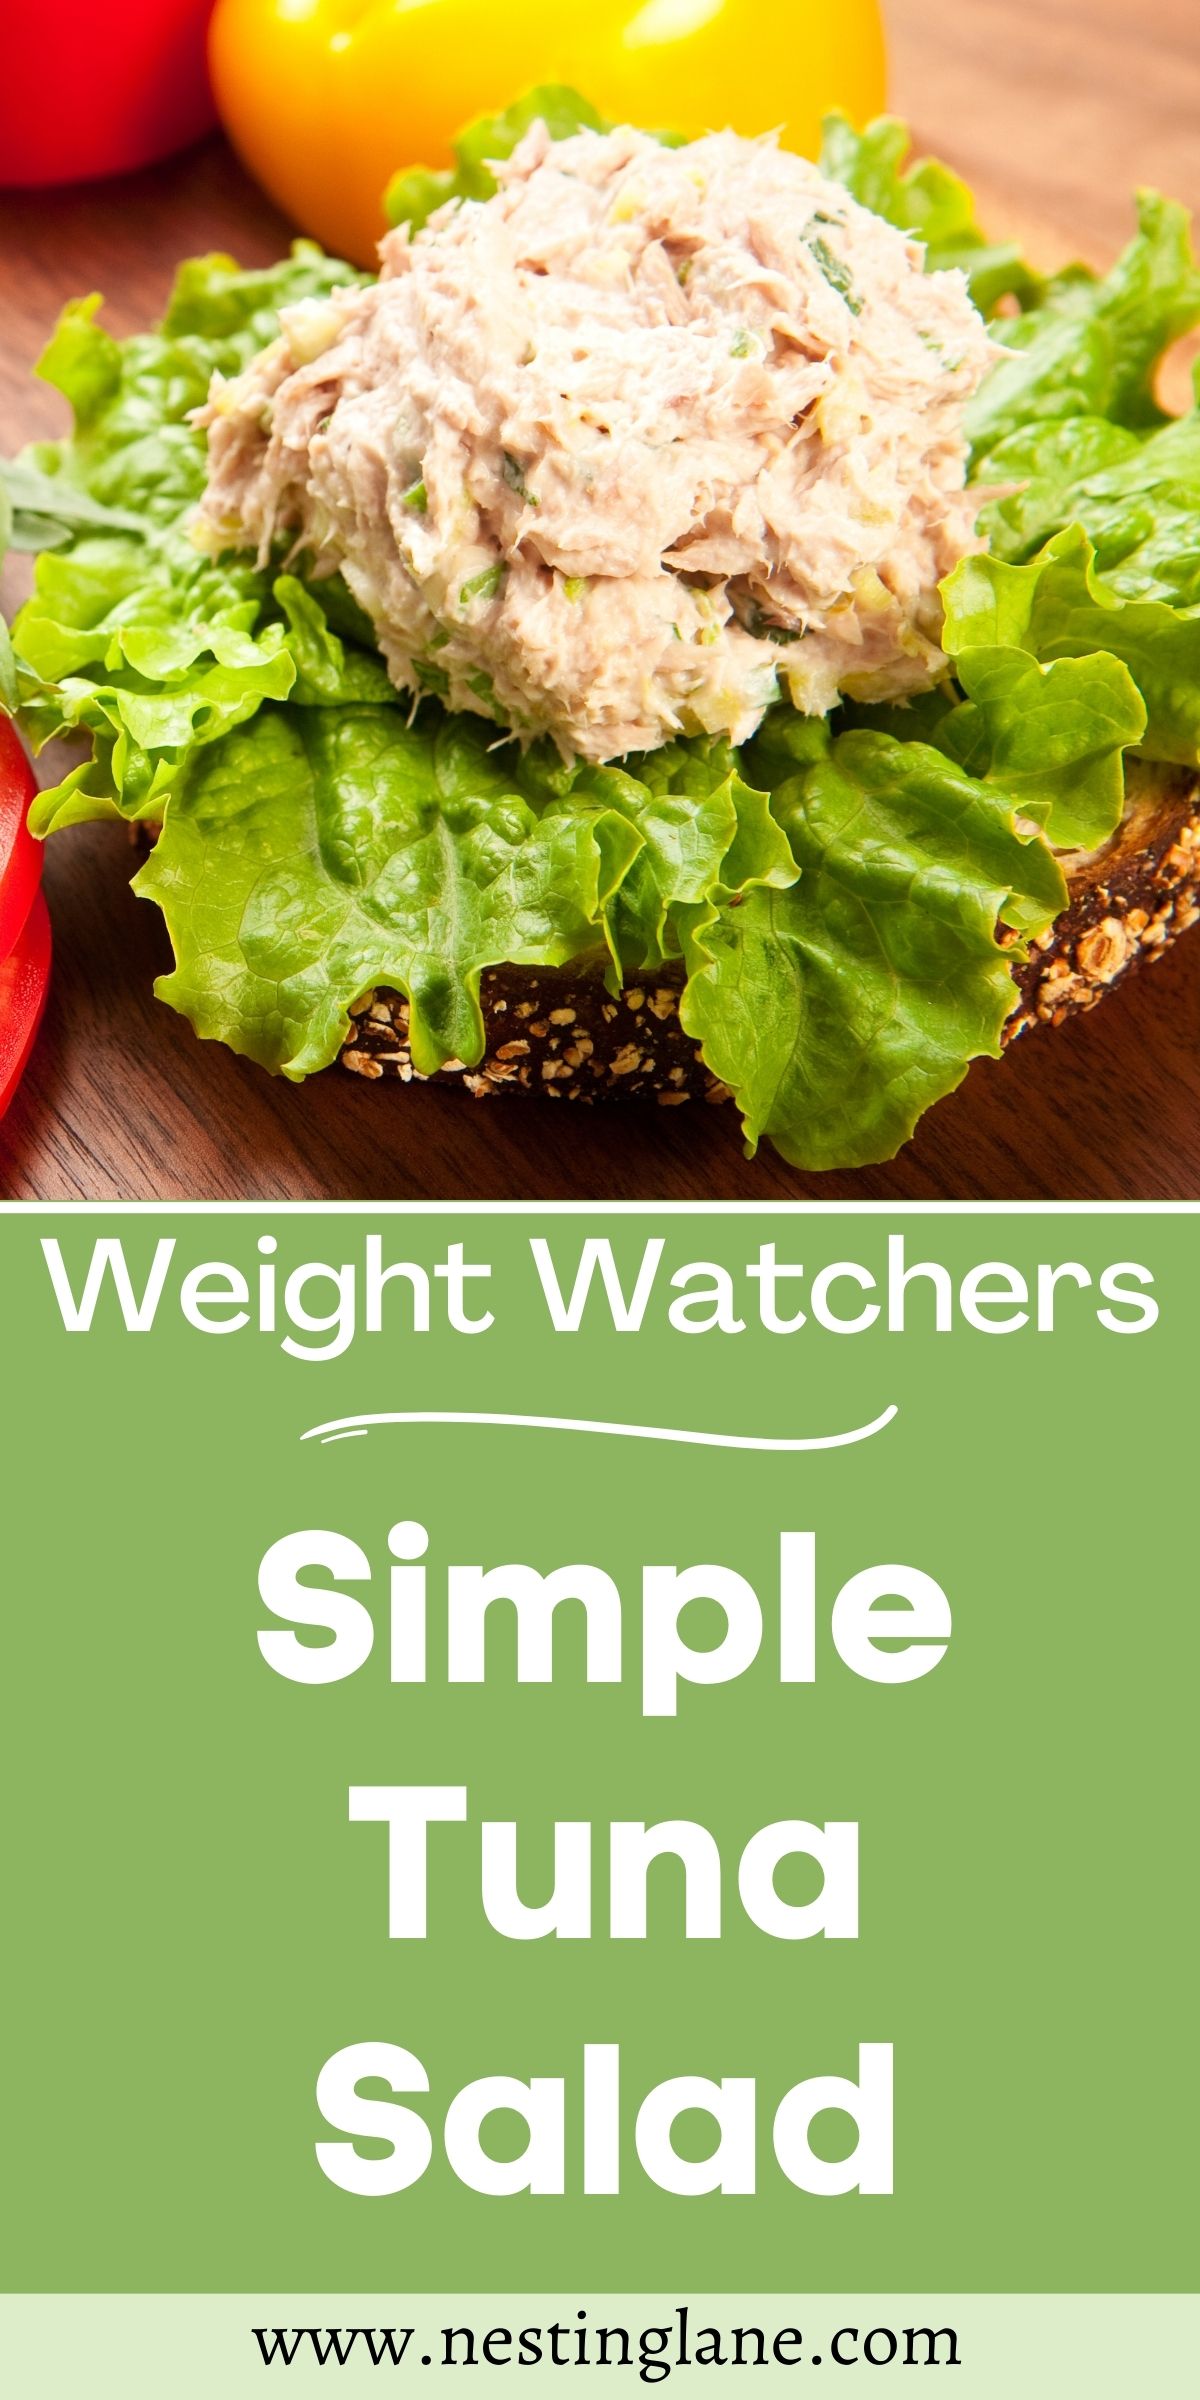 Graphic for Pinterest of Weight Watchers Simple Tuna Salad Recipe.